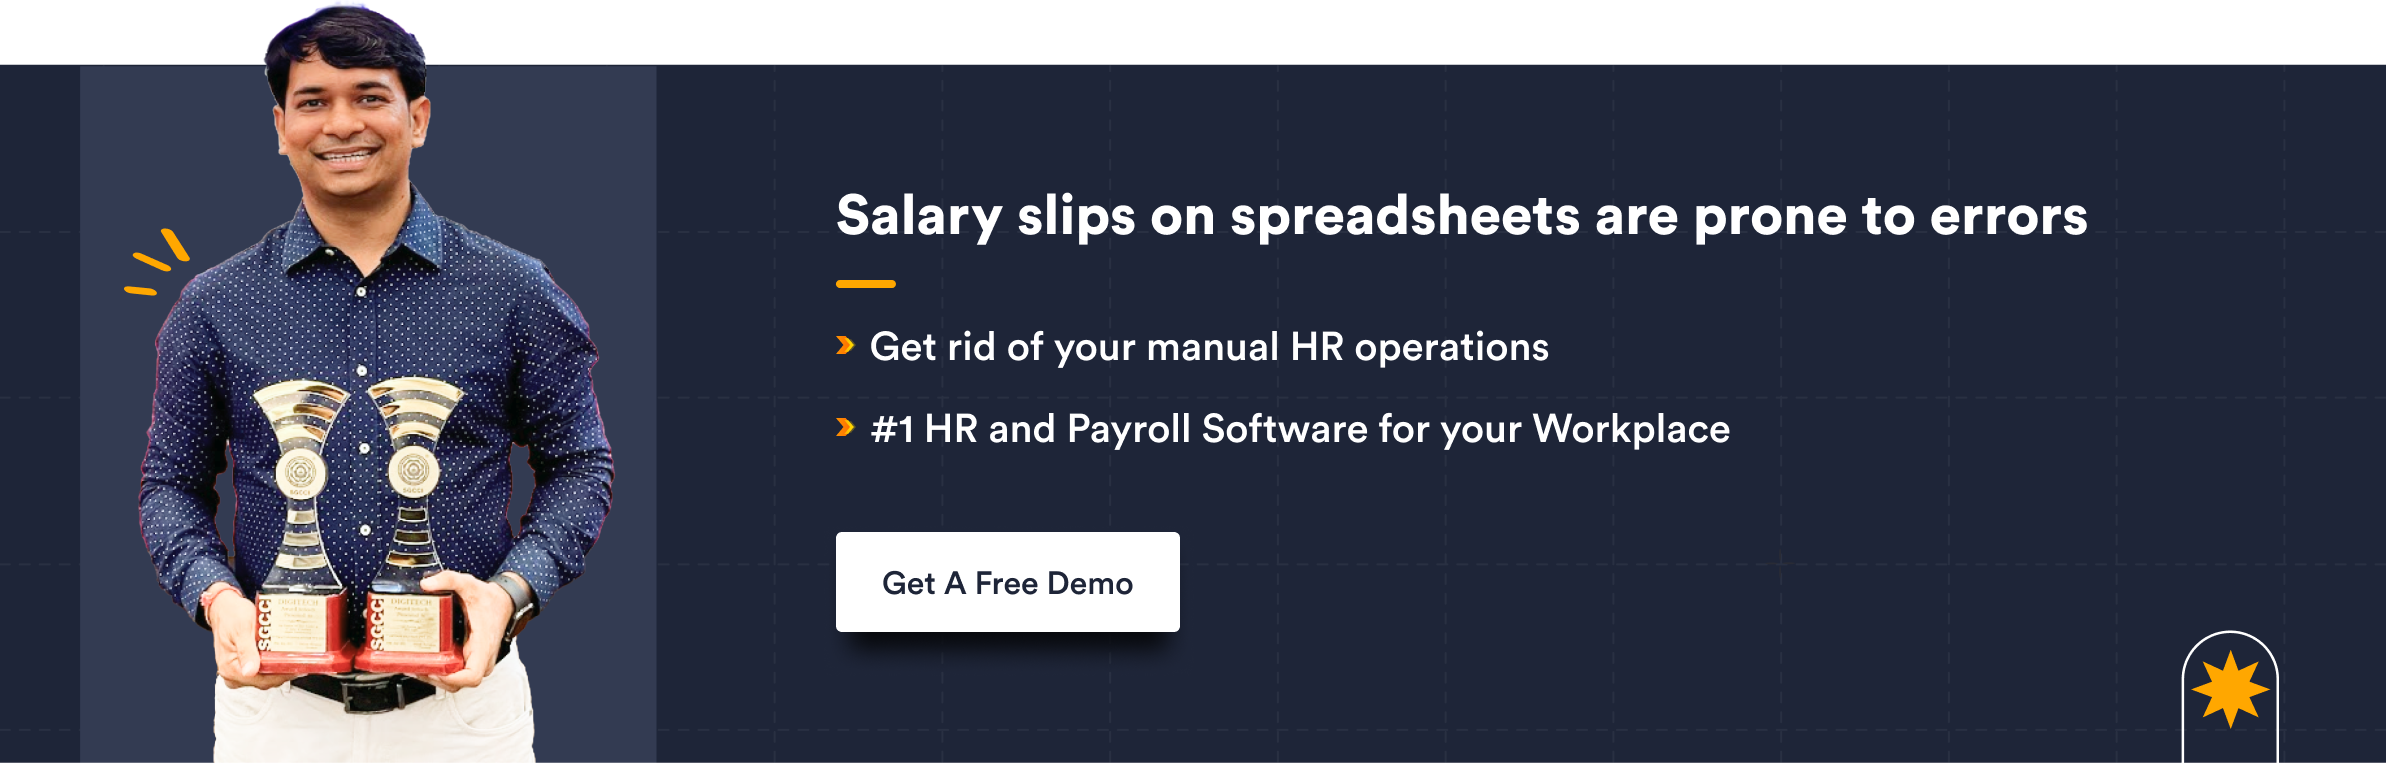 Salary slips on spreadsheets are prone to errors